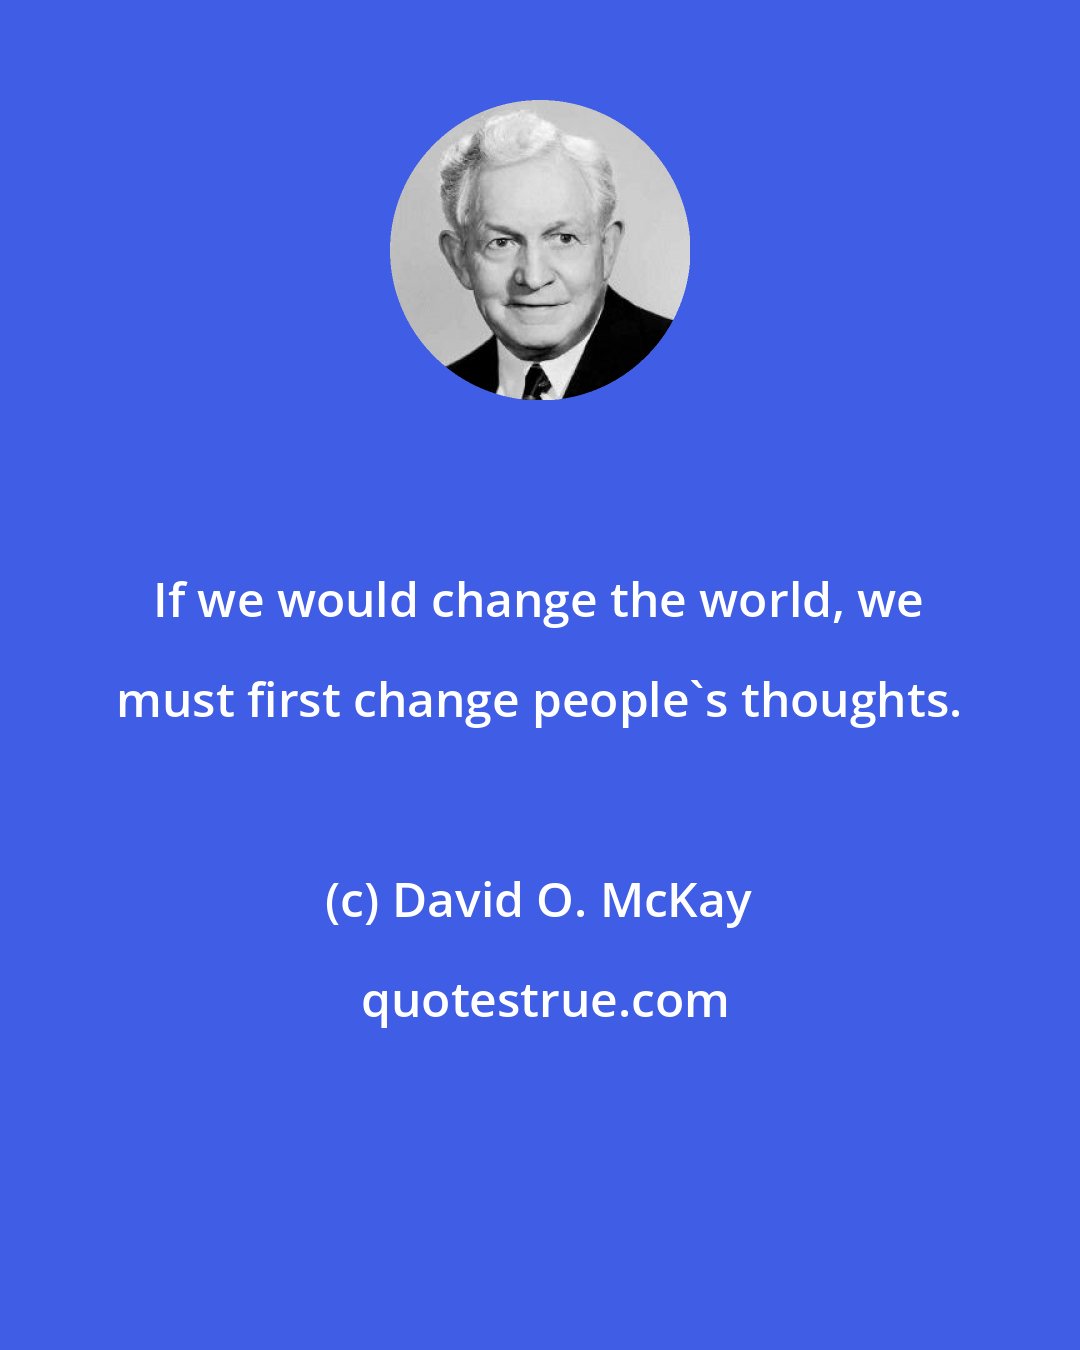 David O. McKay: If we would change the world, we must first change people's thoughts.